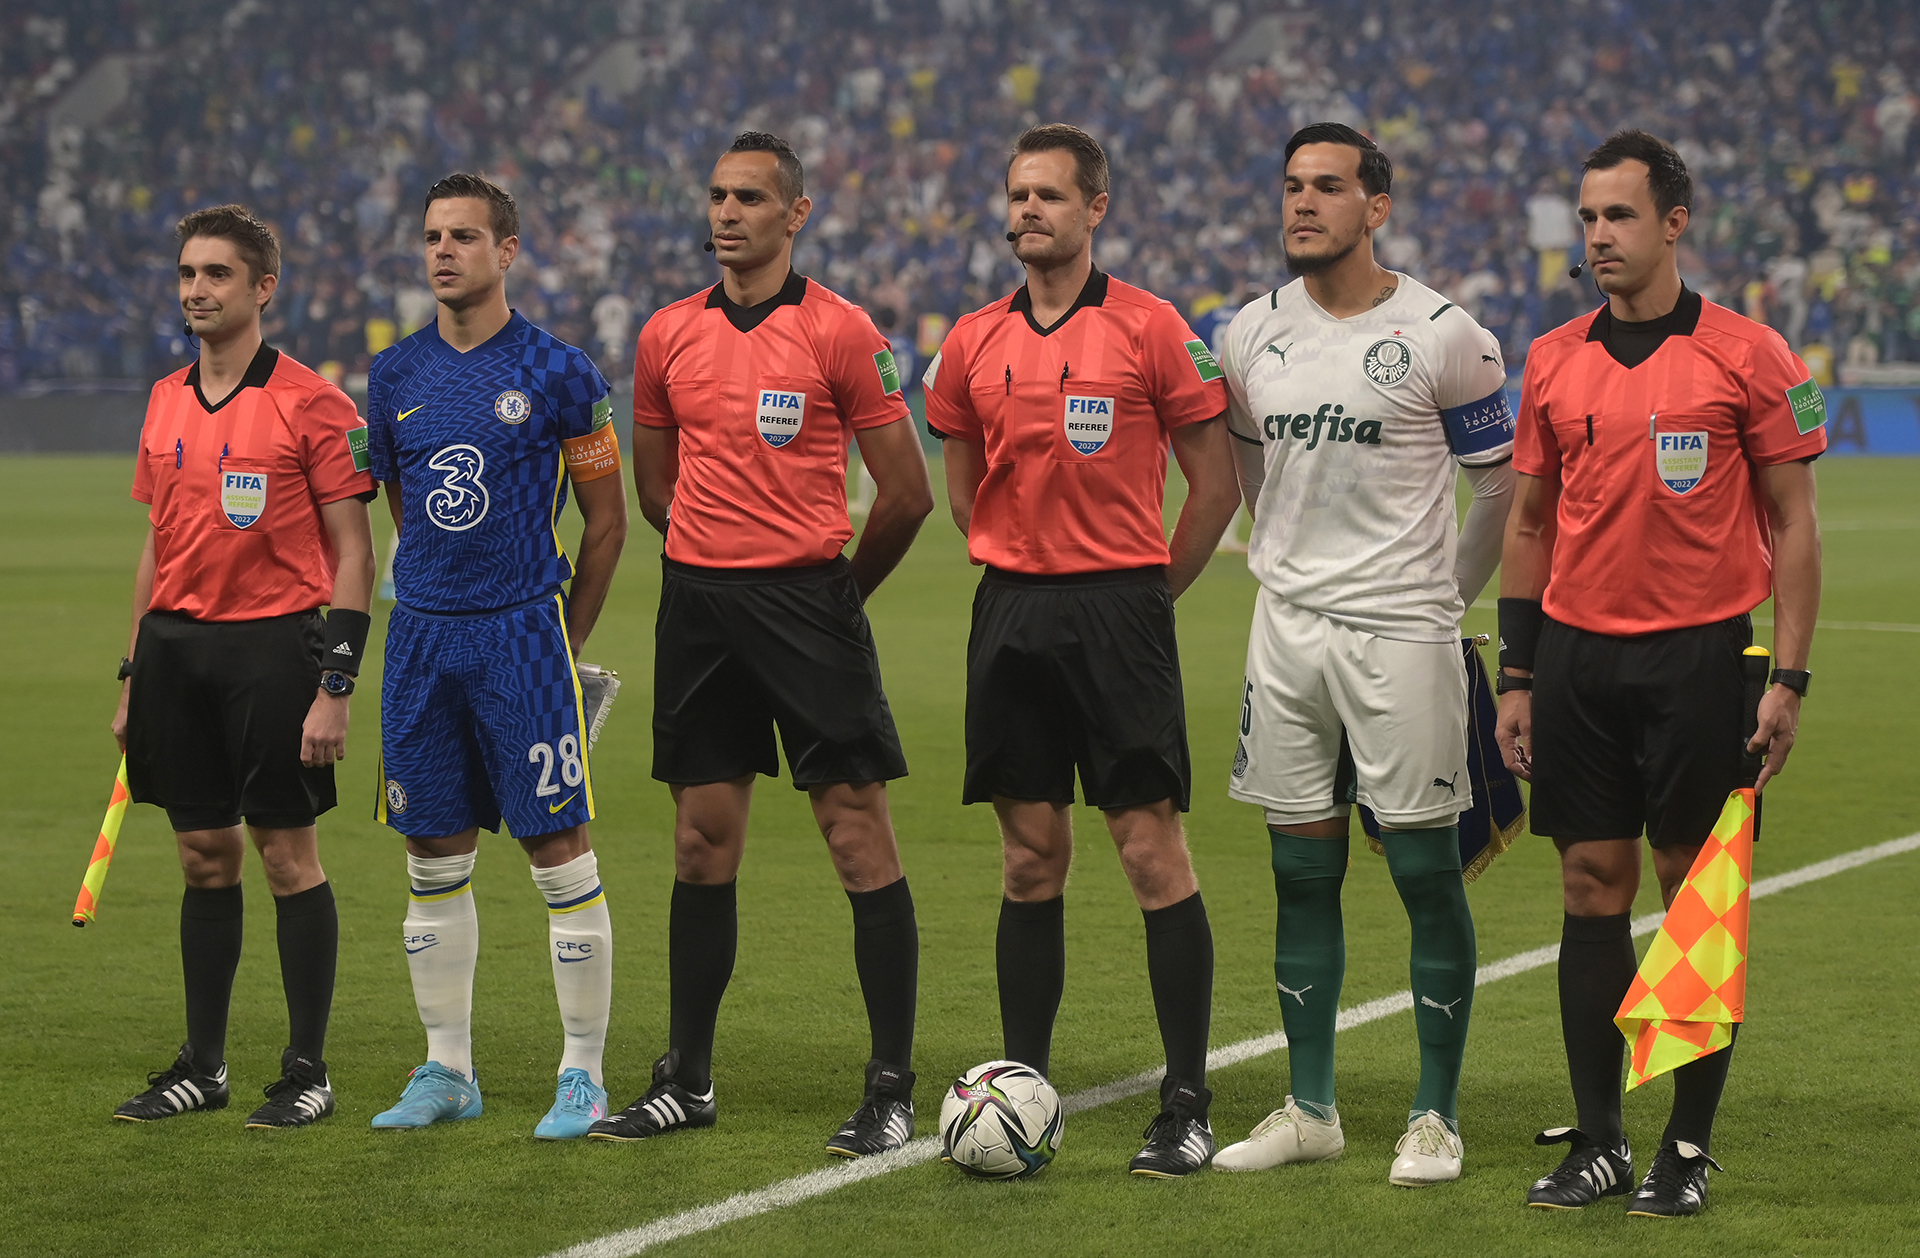 Chris Beath, Ashley Beecham, Anton Shchetinin, Mustapha Ghorbal and Cesar Azpilicueta of Chelsea and Gustavo Gomez of Palmeiras prior to the FIFA Club World Cup UAE 2021 Final match between Chelsea and Palmeiras